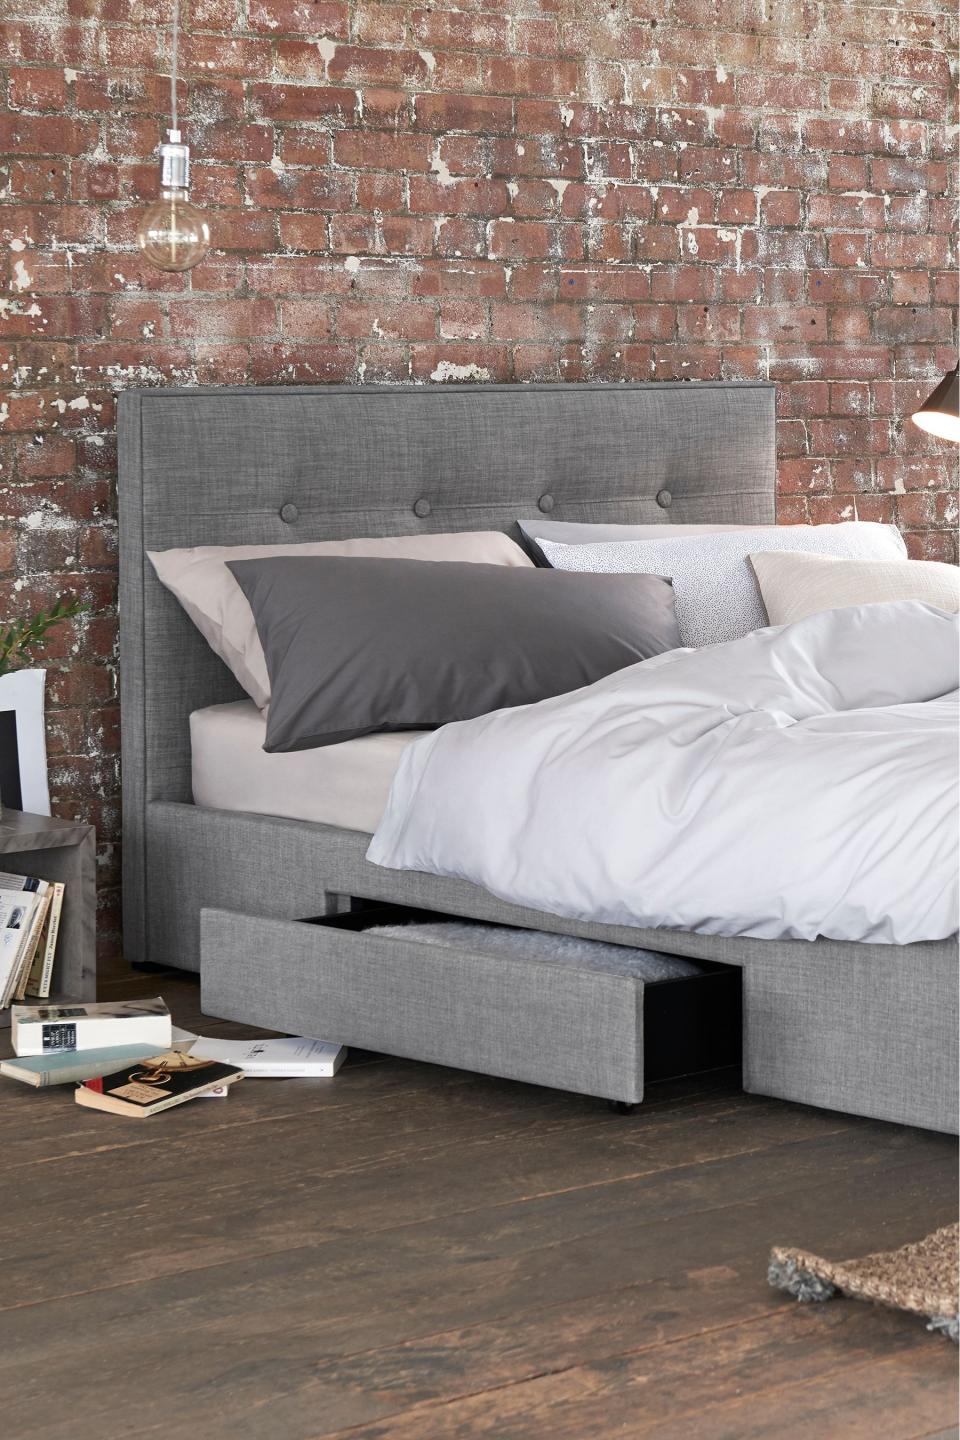 2 Drawer Bedstead Studio Collection By Next | £280 (Was £475). [Photo: Next]